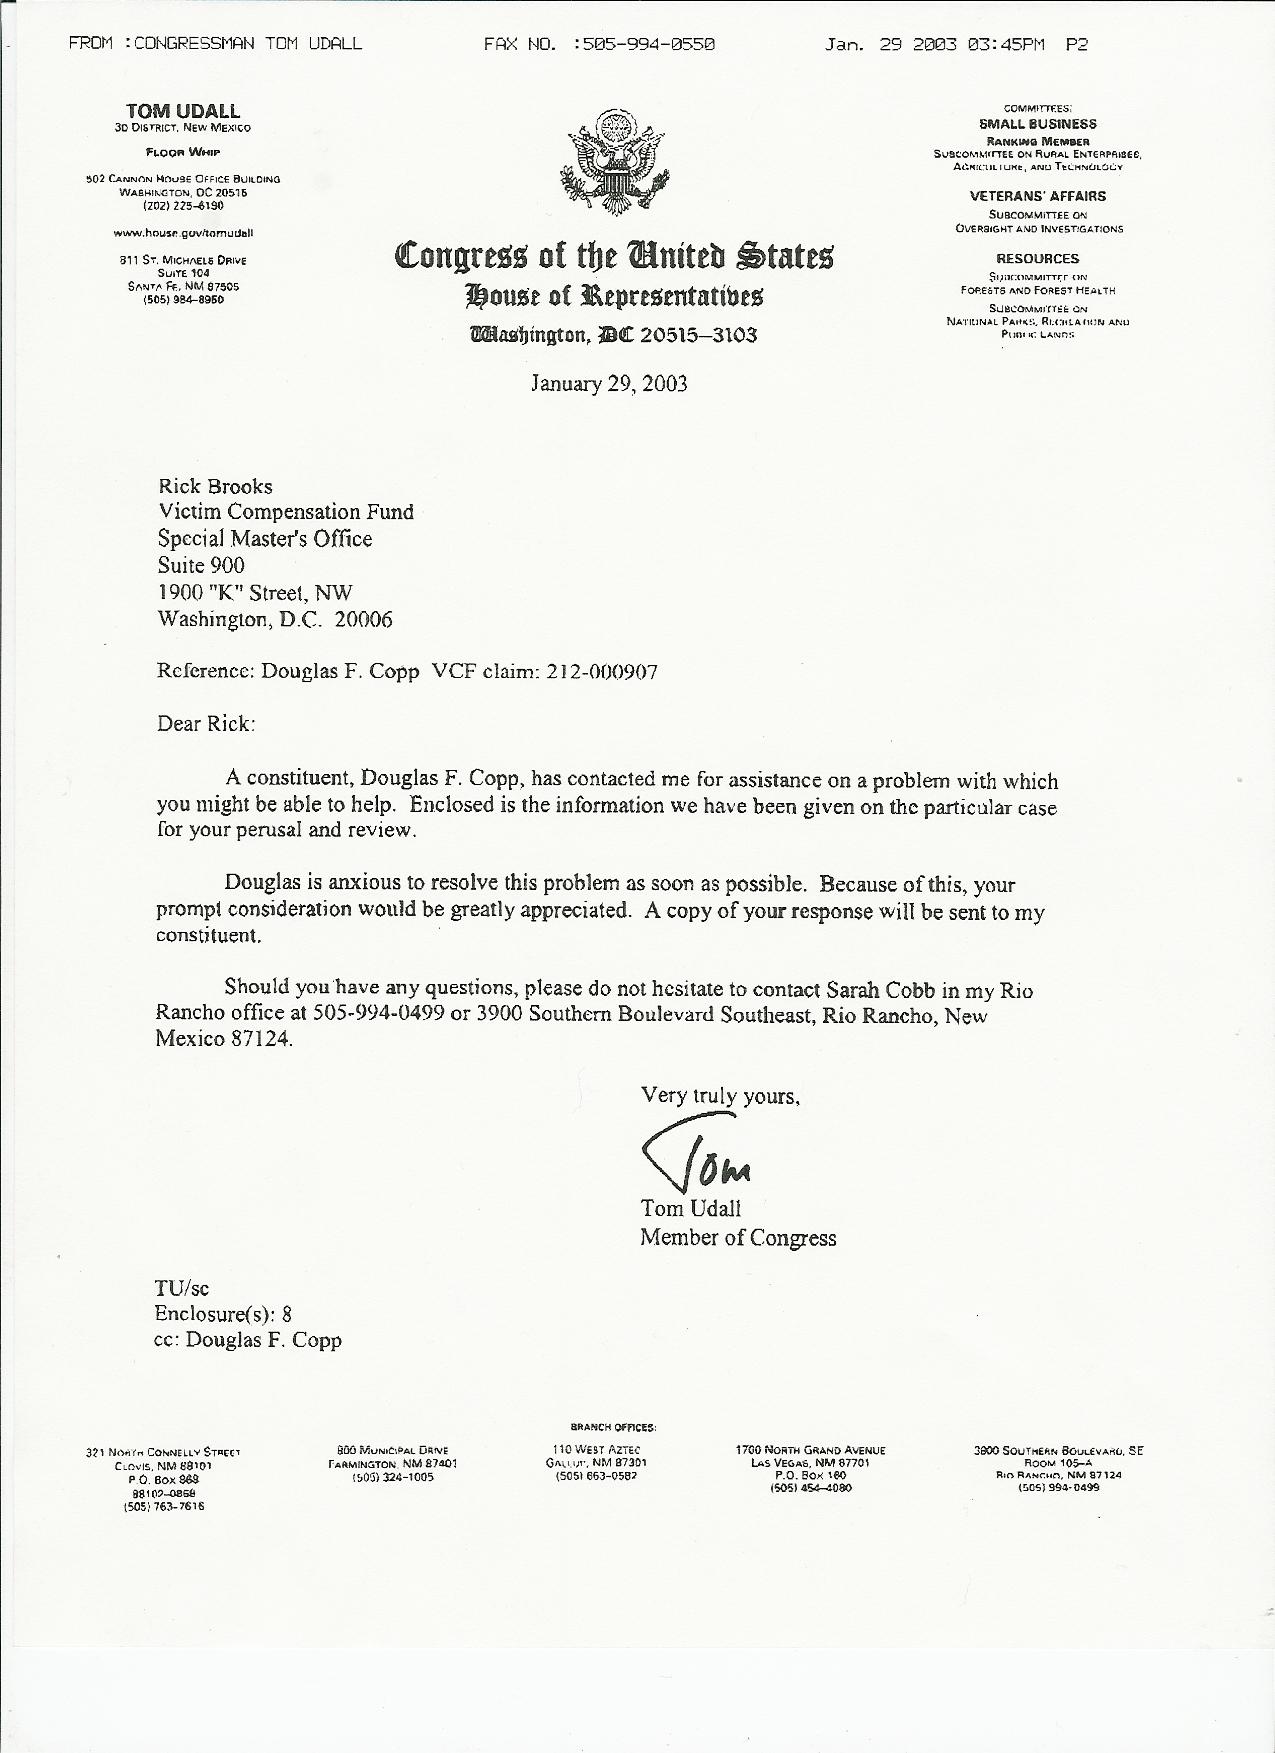 Copy Of Congressman Tom Udall's Letter